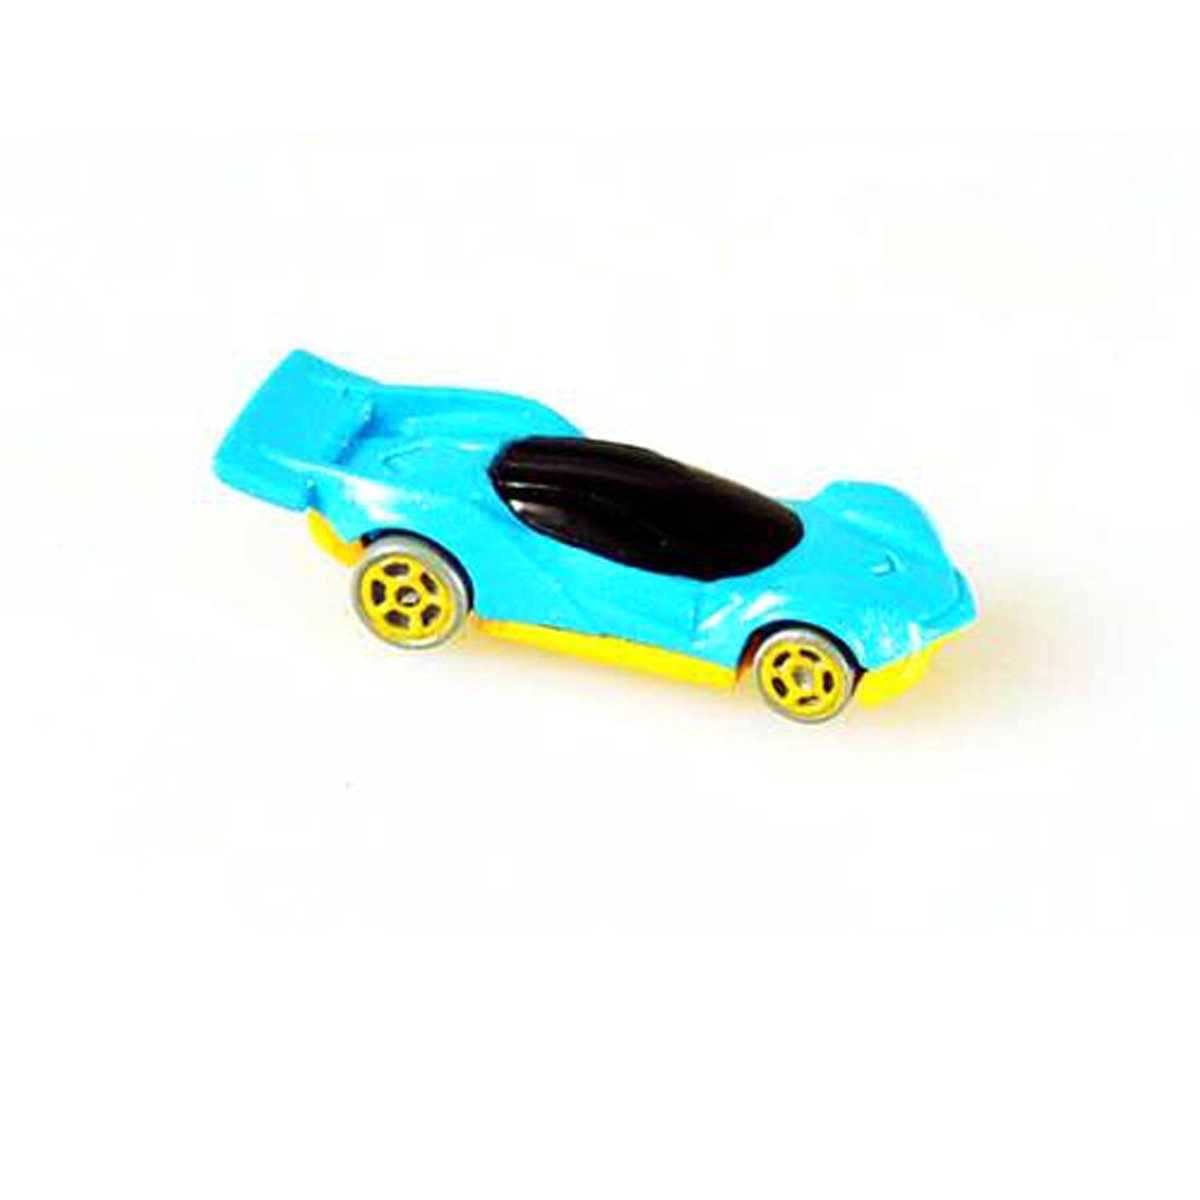 WORLD'S SMALLEST MINI HOT WHEELS DIECAST CAR SET OF 3 JUST AS PICTURED LOOSE 